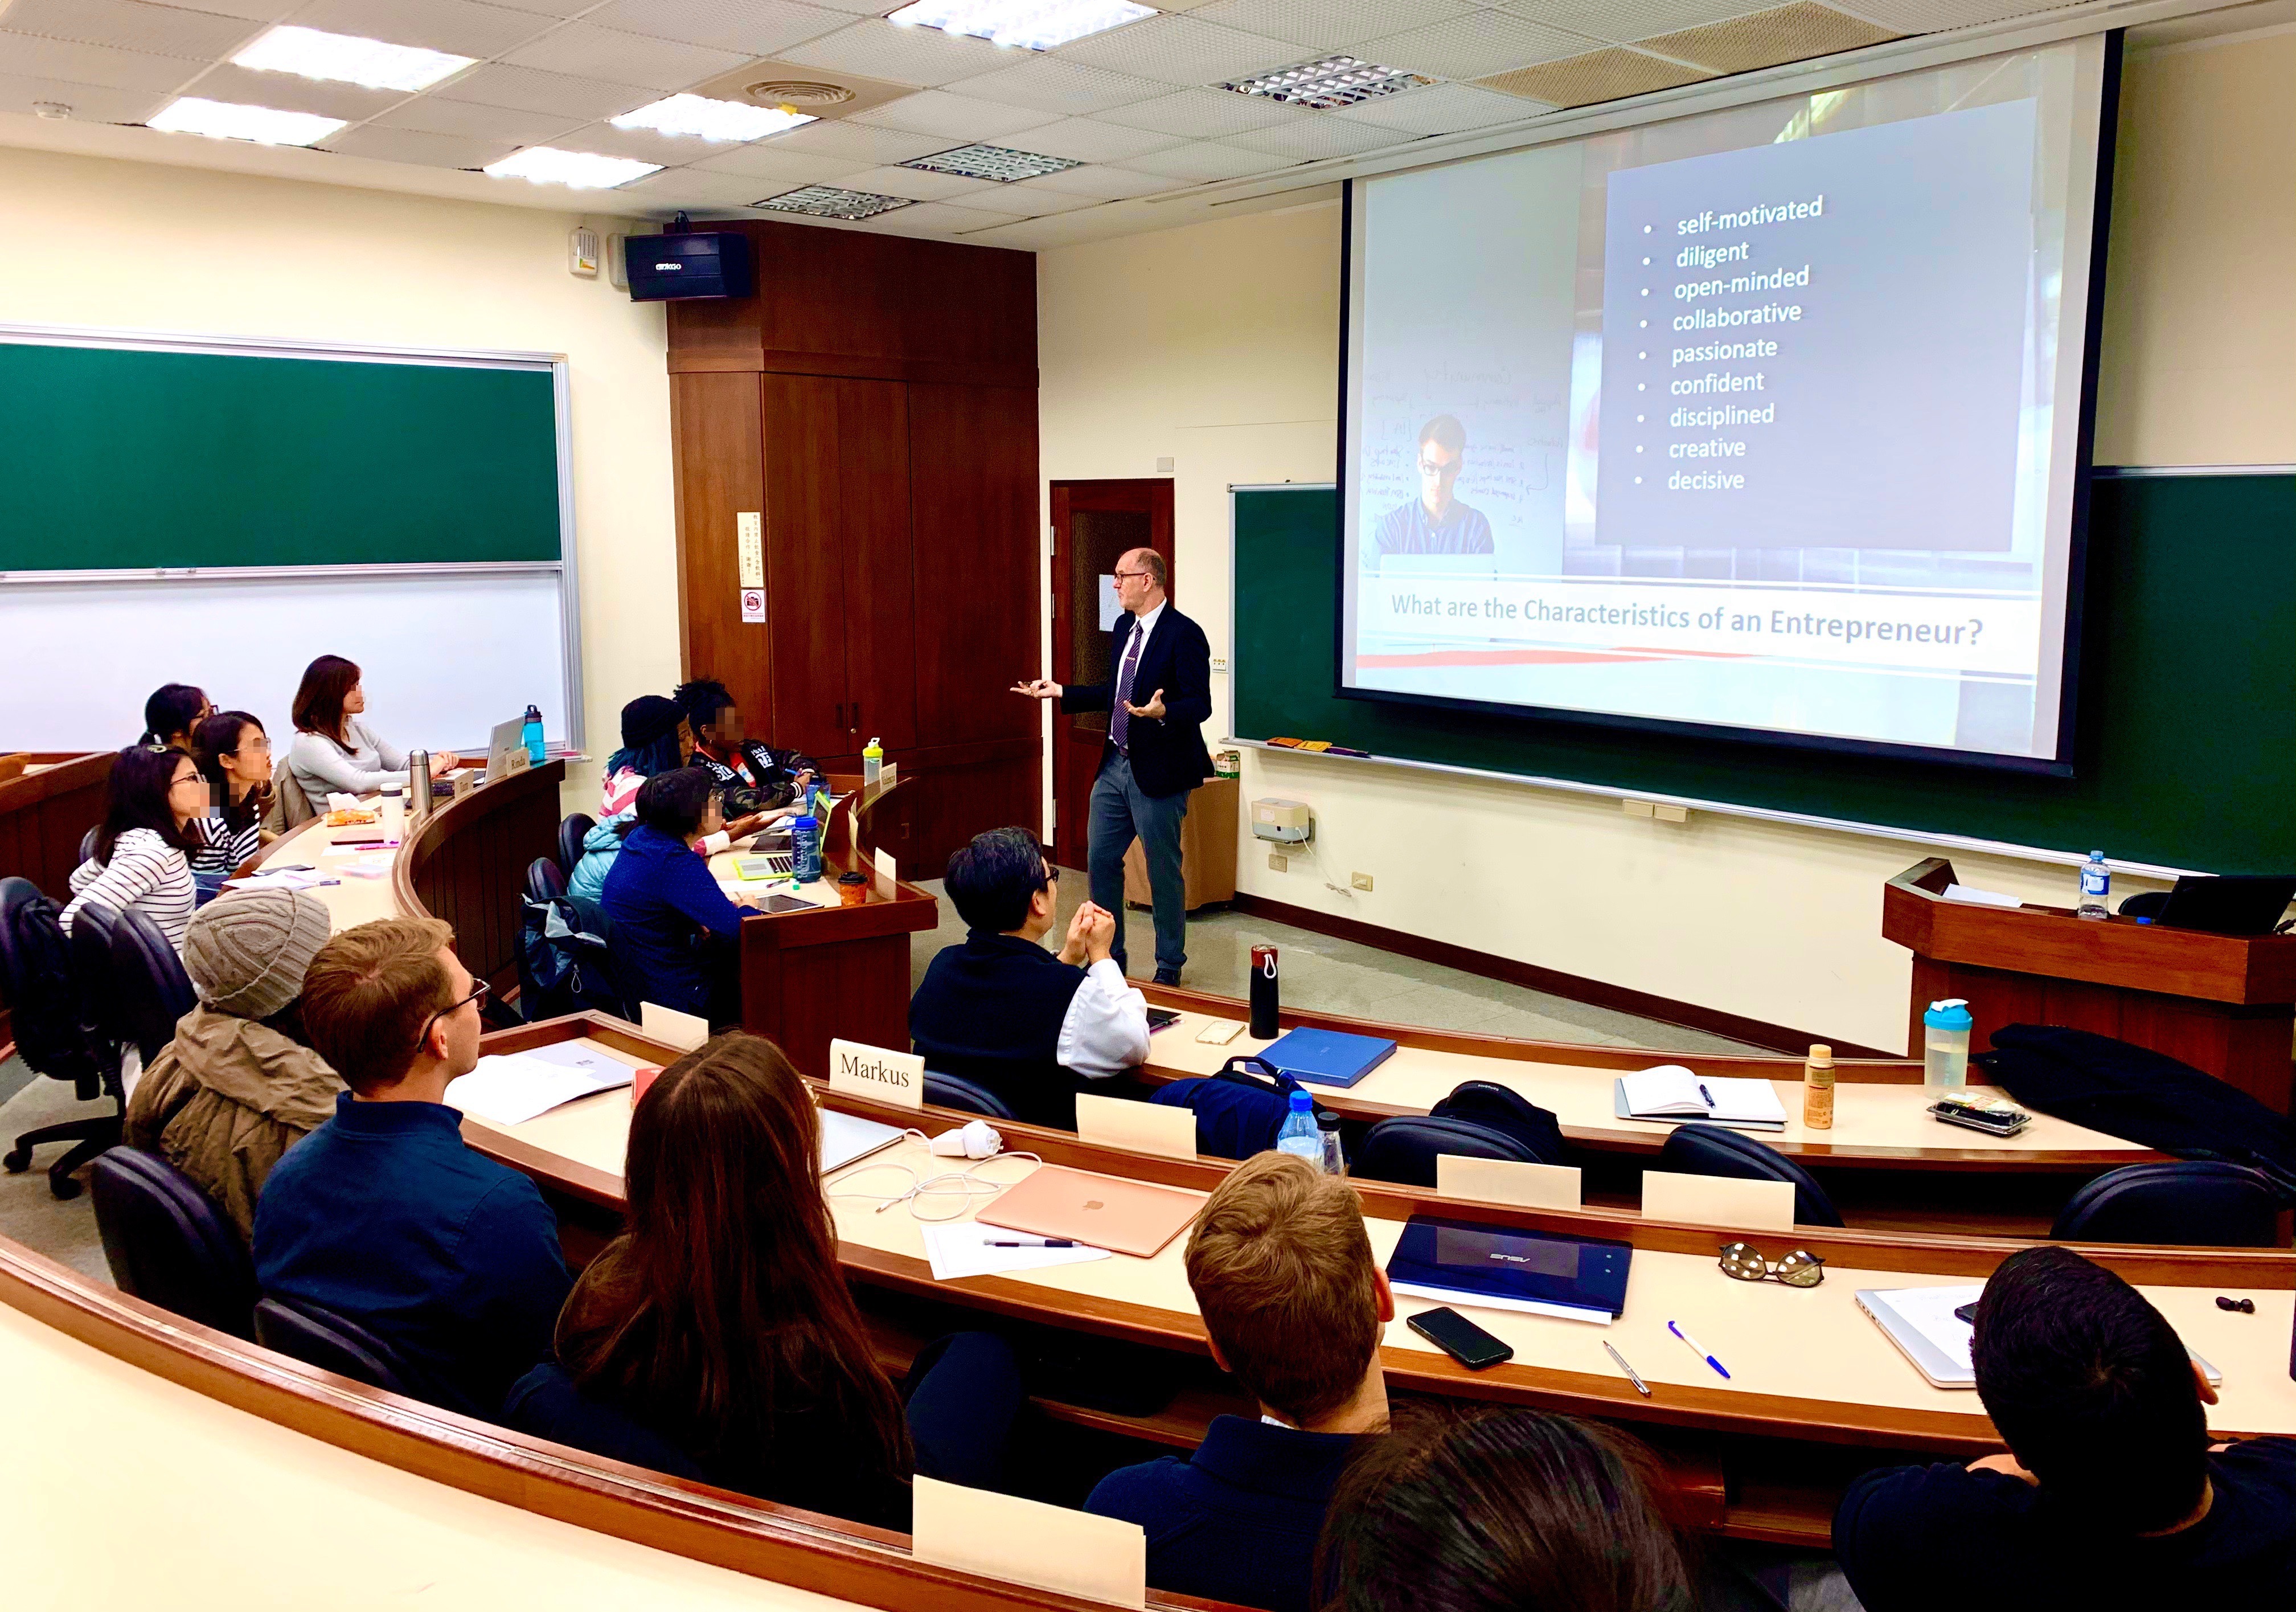 NextGen bolsters Taiwan’s global competitiveness by developing business communication skills